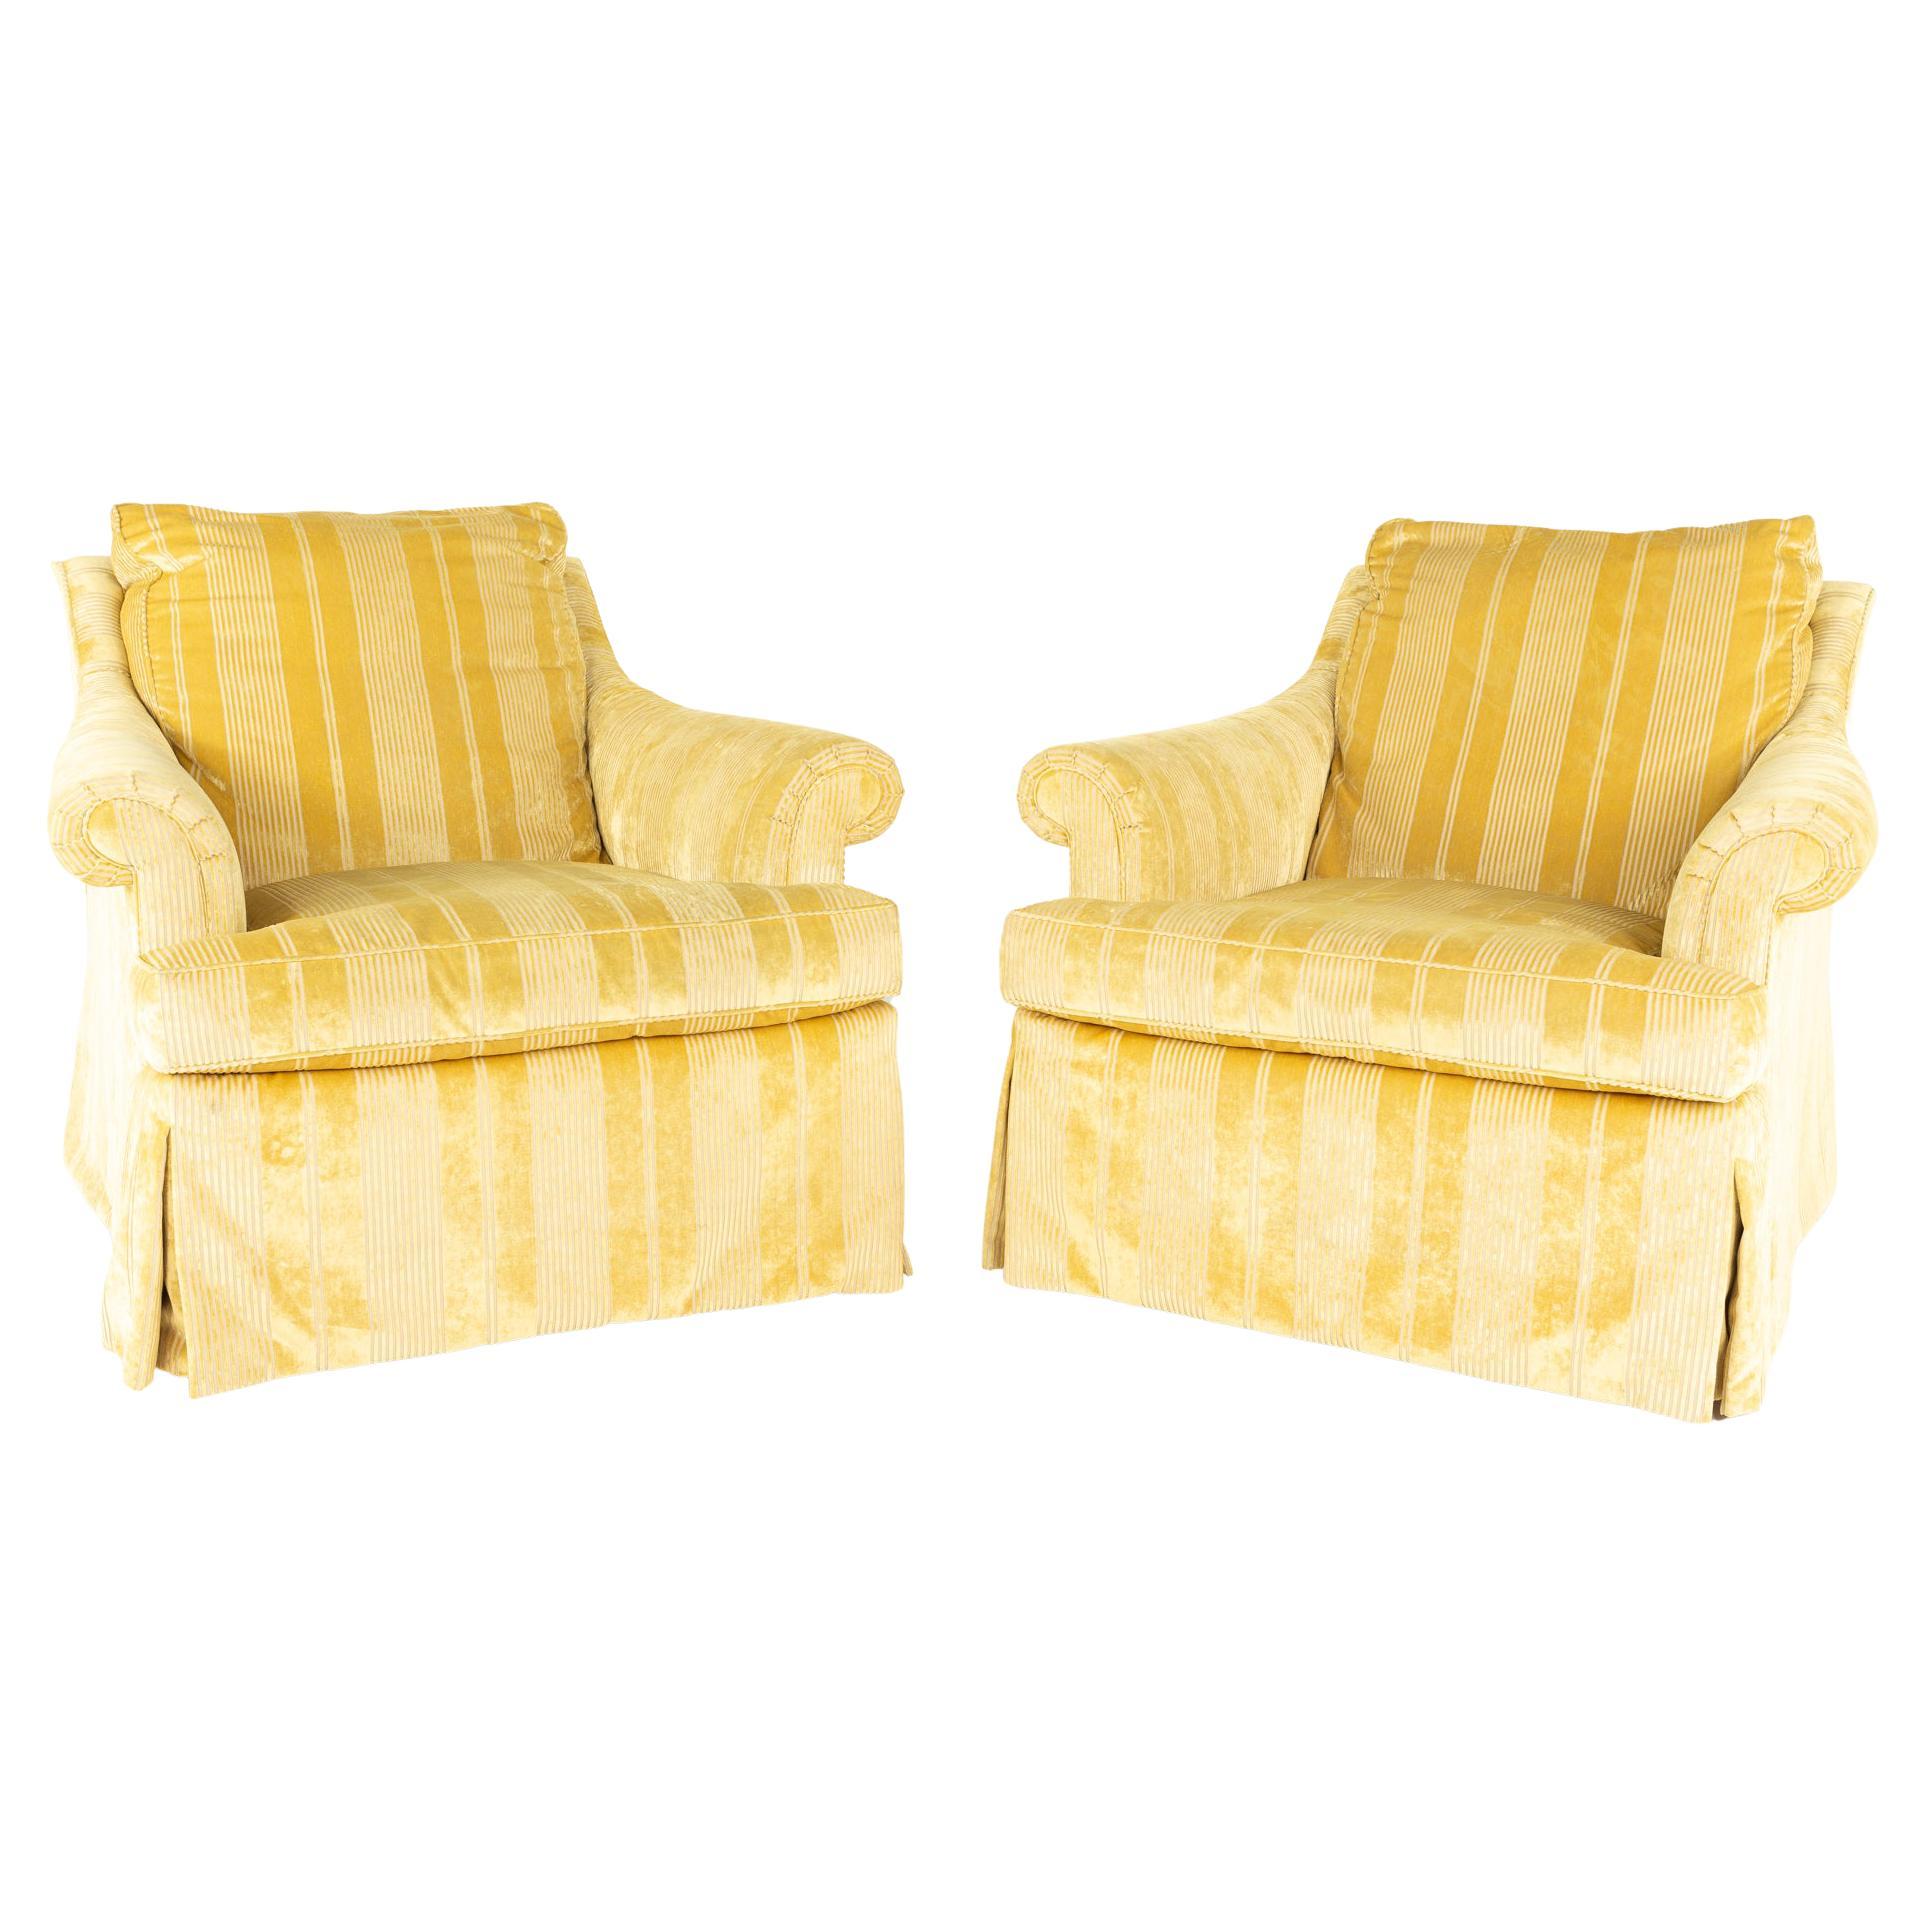 A. Rudin Contemporary Lounge Chairs, Pair